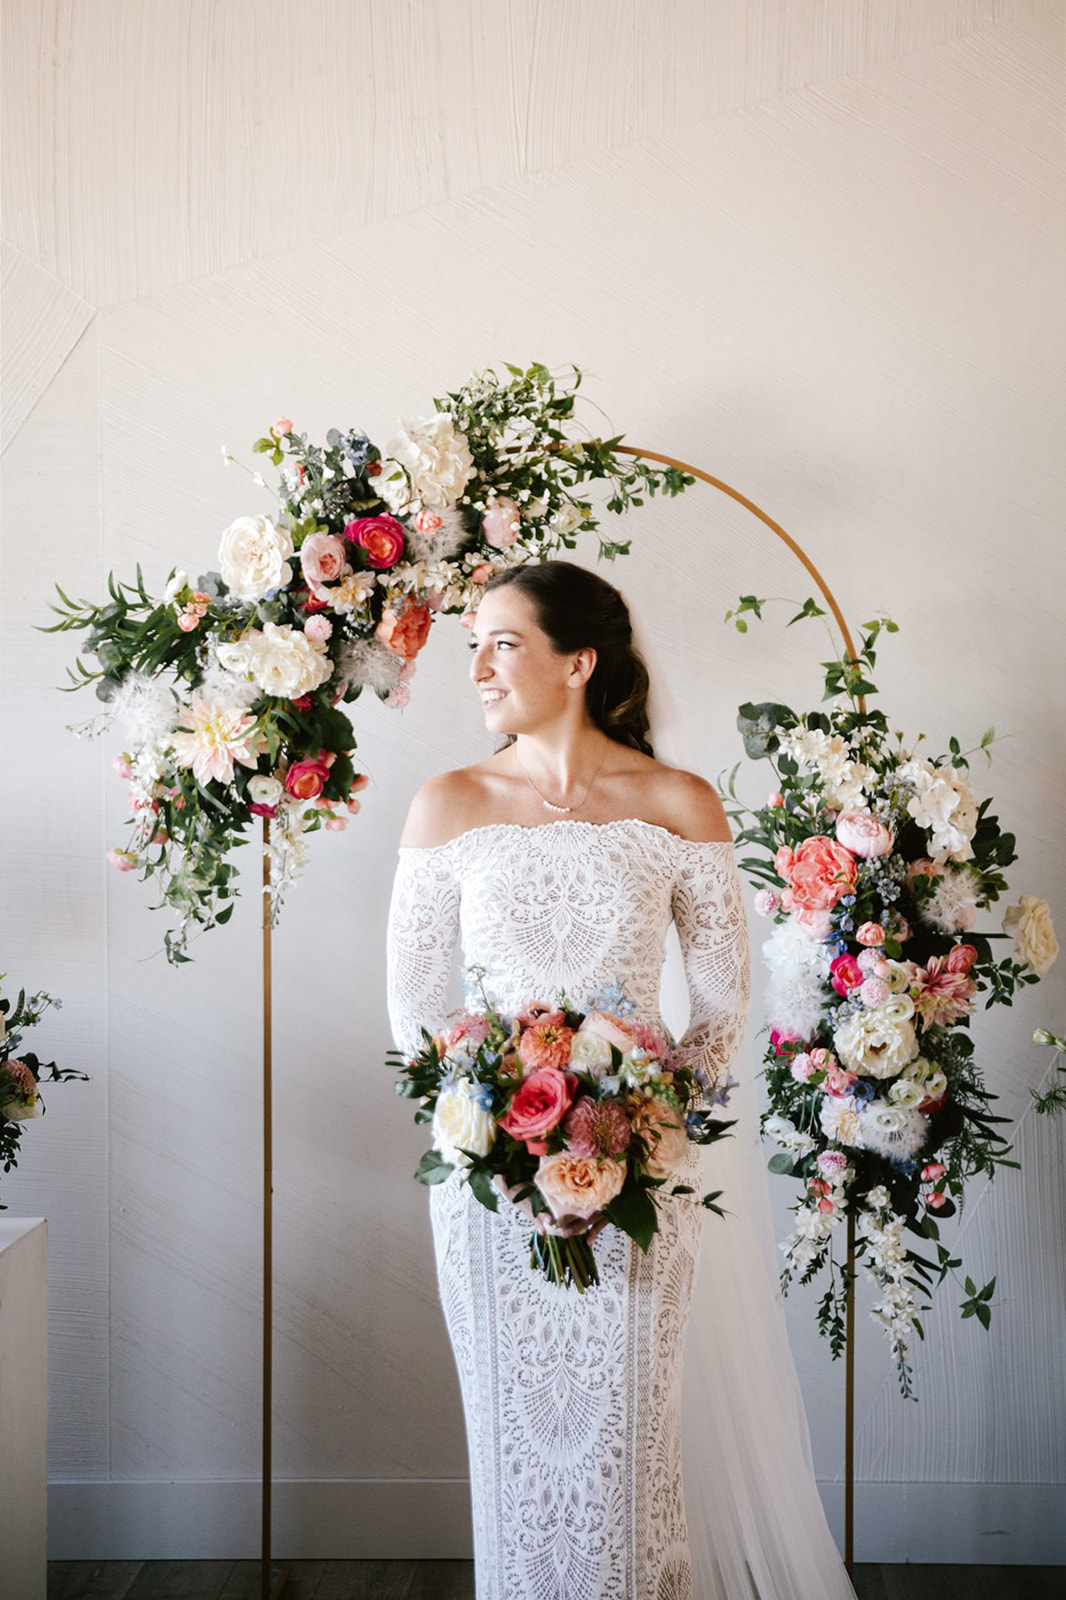 At Walden Chicago, the bride first look amidst vibrant peach, coral, and white blooms.